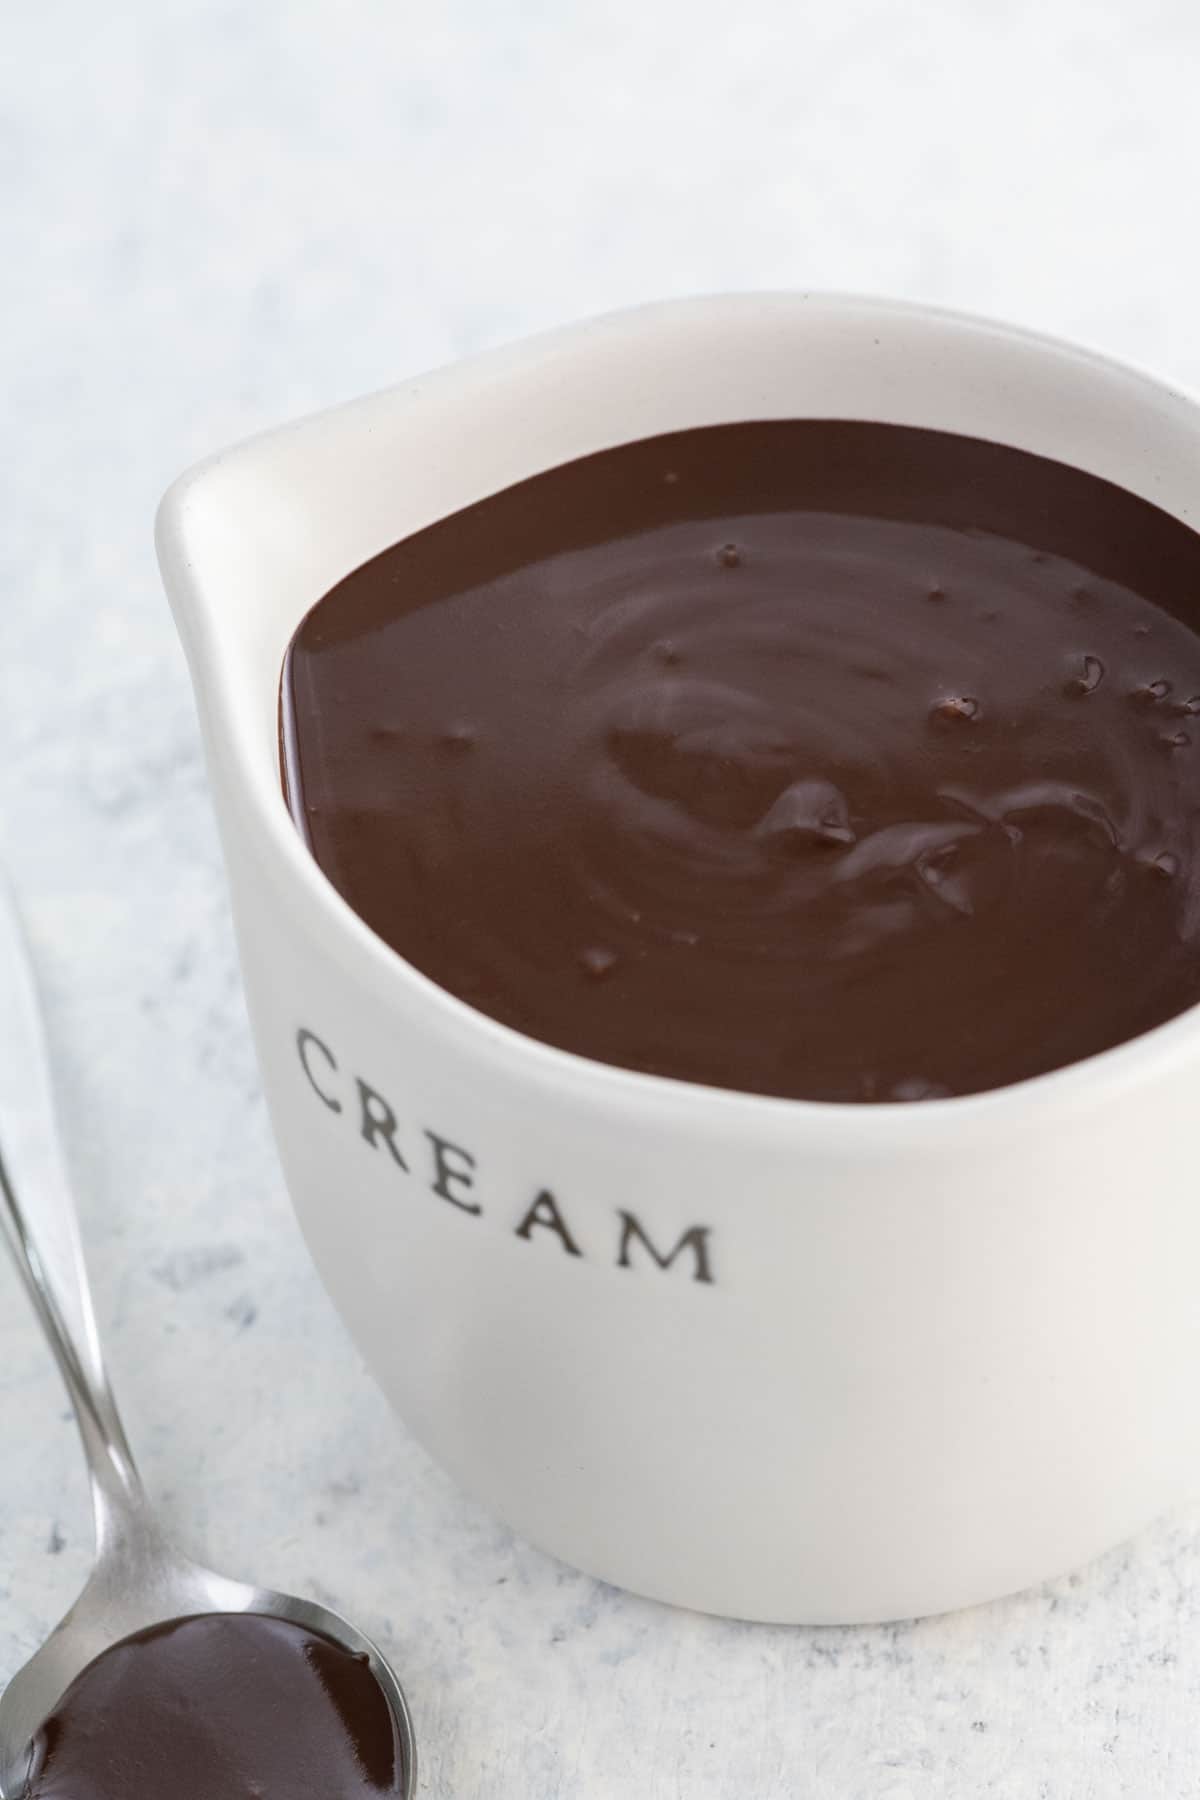 chocolate ganache ratio 1 to 1 in a small pitcher and on a spoon